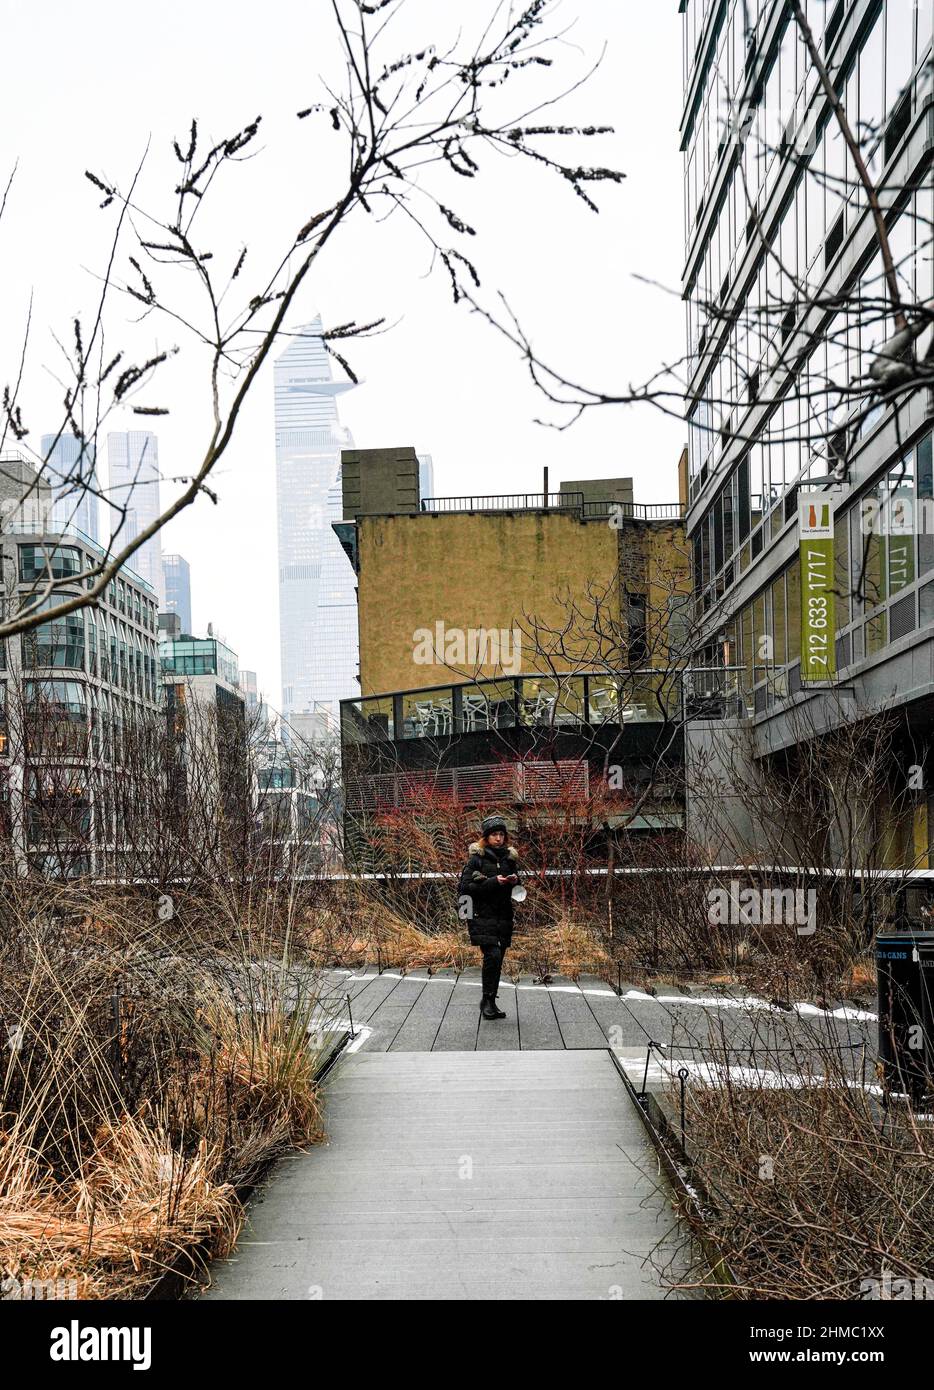 People strolling on the High Line, an elevated urban park on the formerly disused railway viaduct, on the west side of Manhattan, New York. Stock Photo